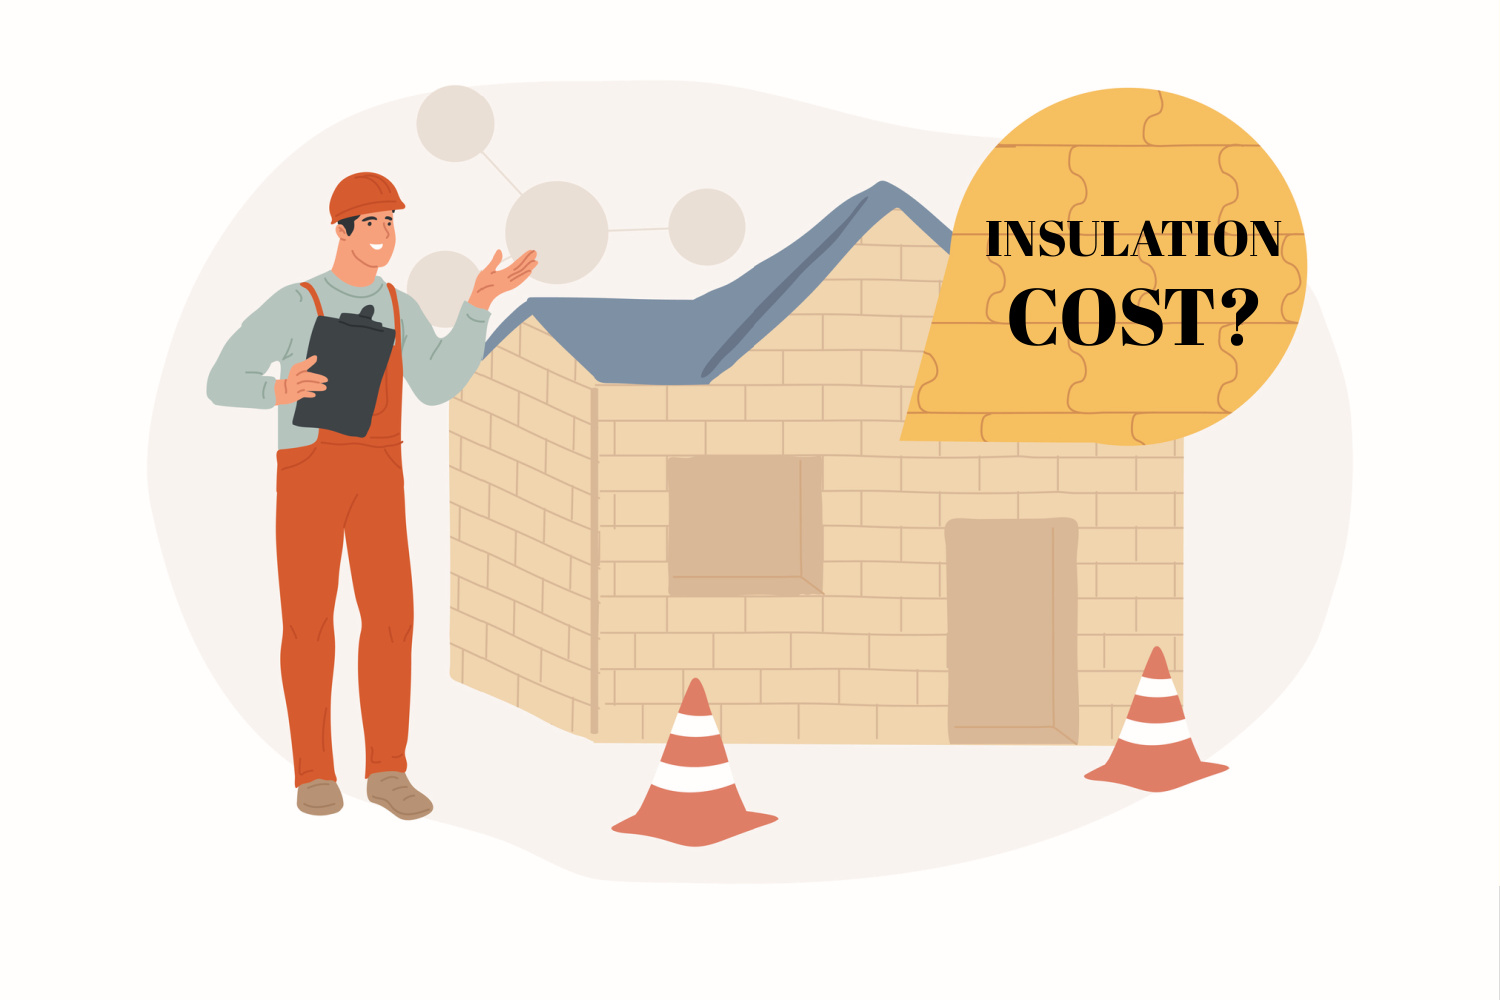 How Much Does Insulation Cost? (Average Cost, Prices, and Factors to Consider)